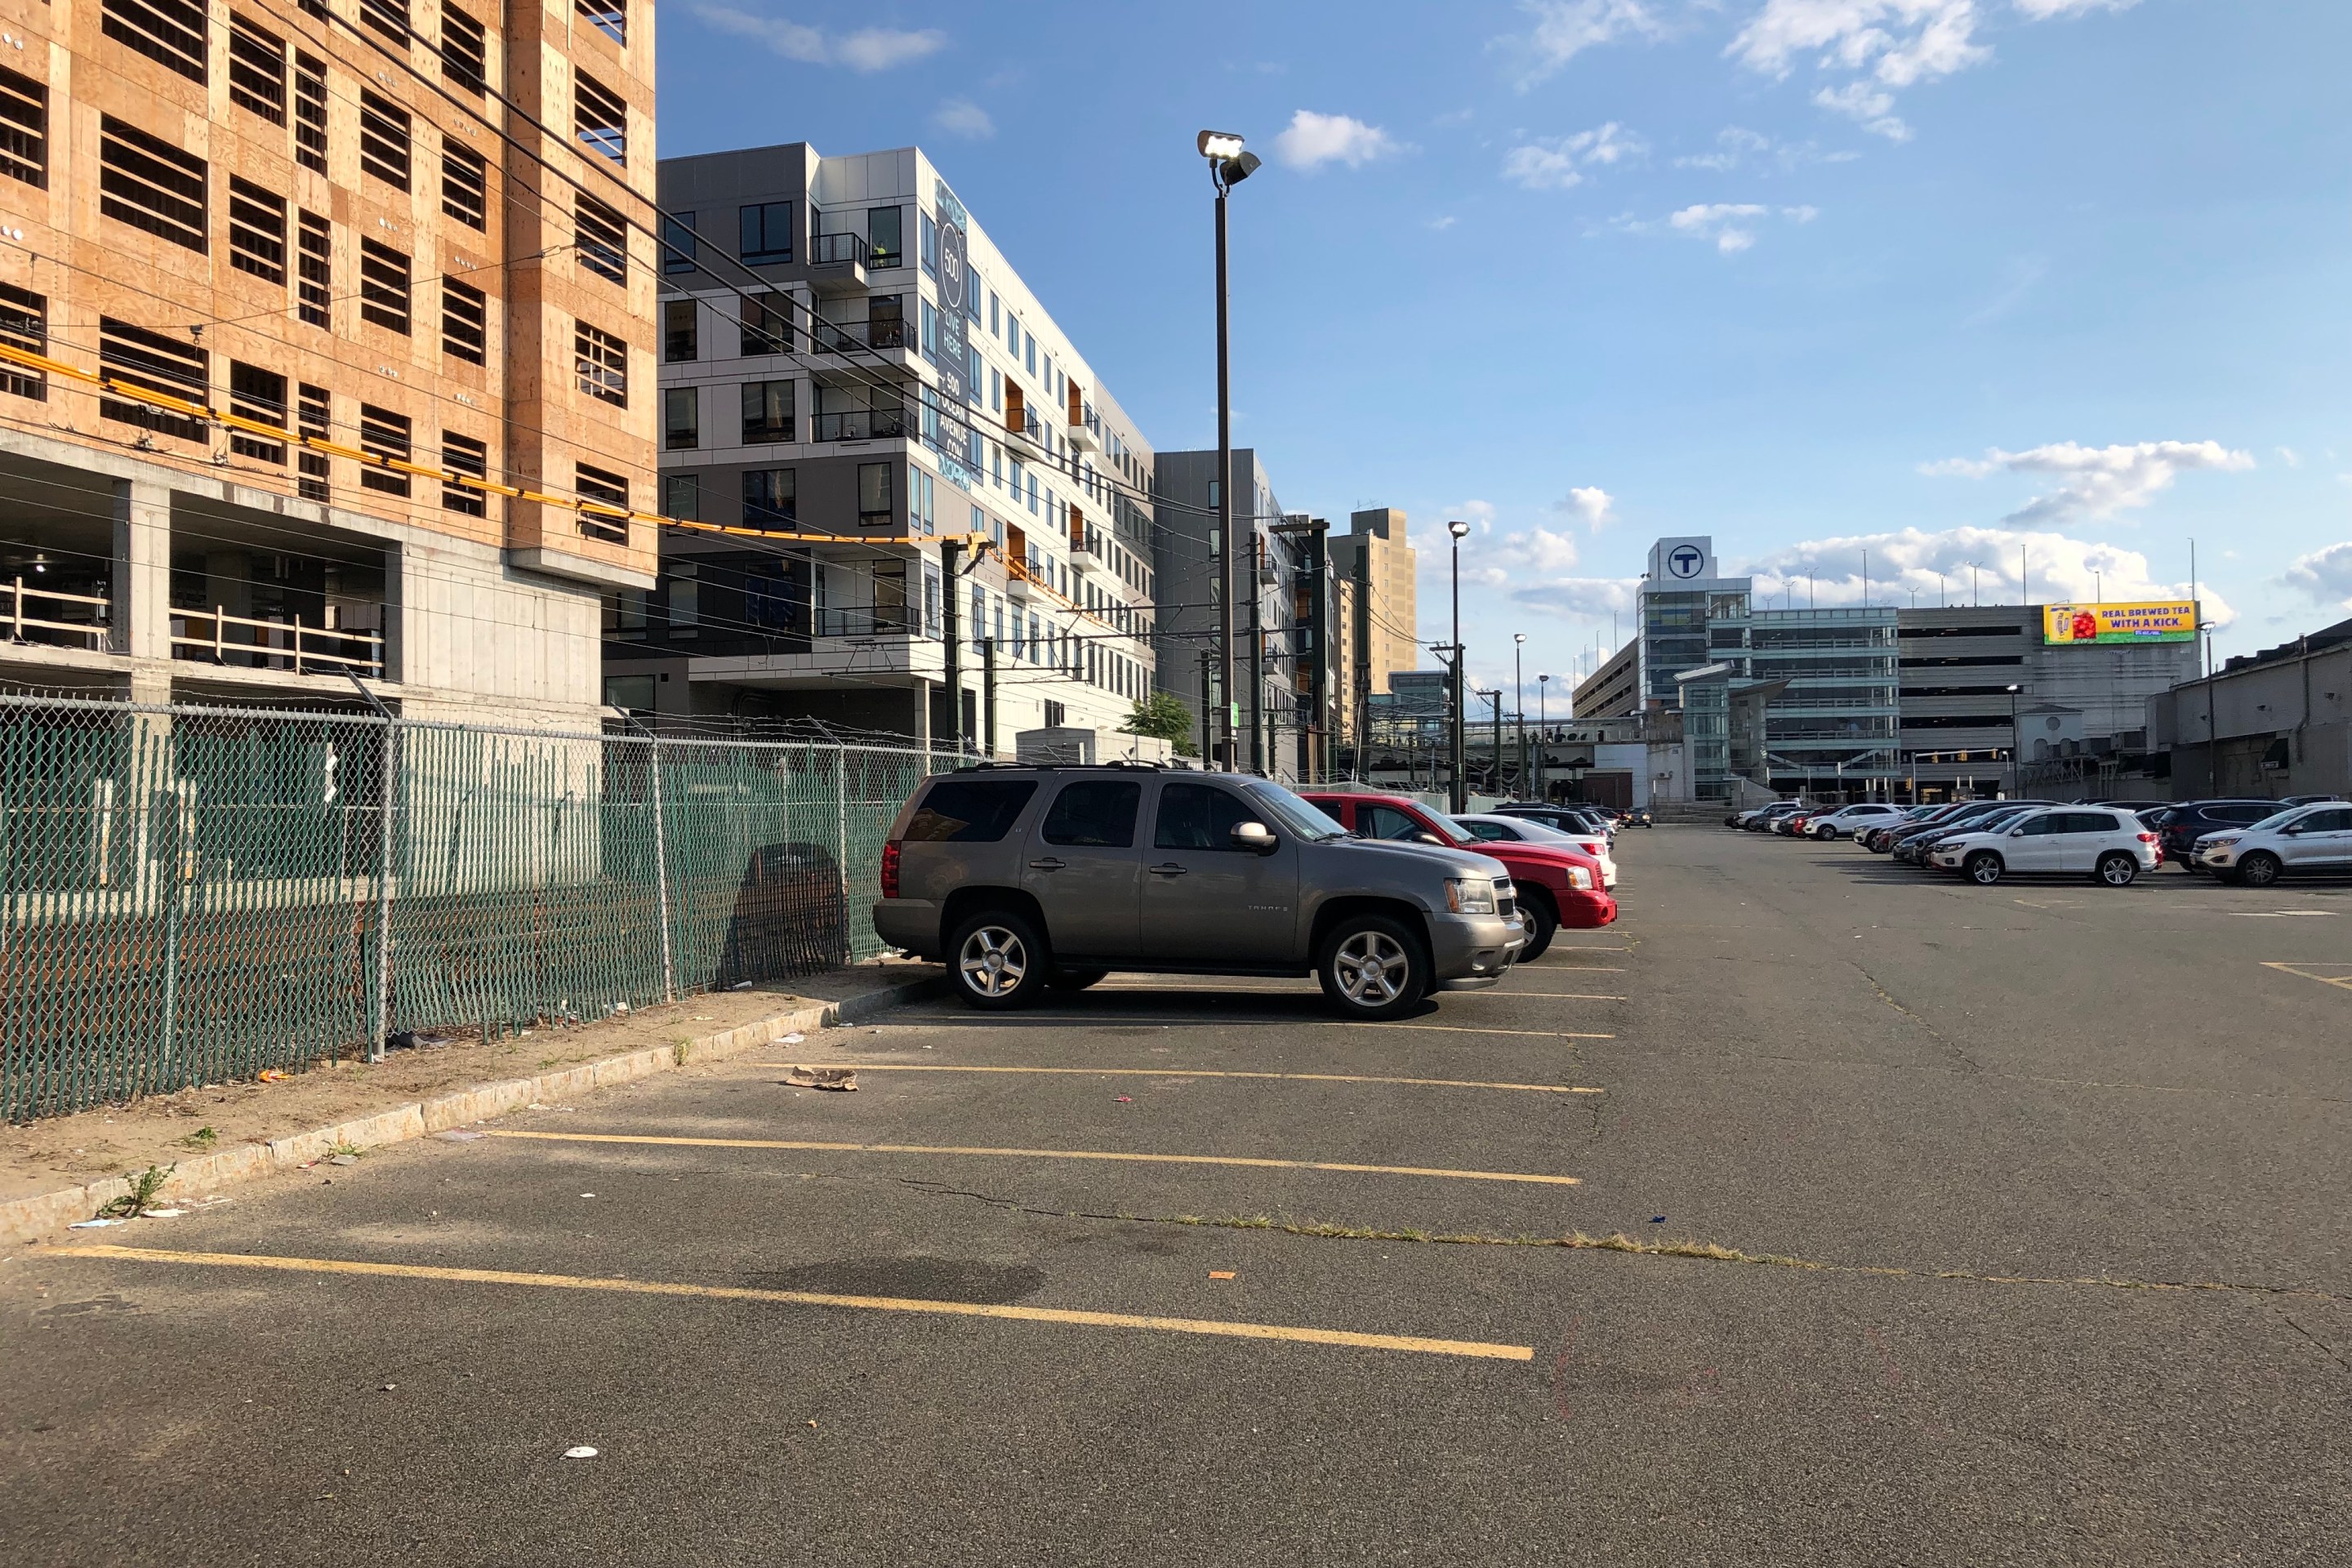 A half-empty parking lot next to several mid-rise apartment buildings, one of which (on the left edge of the photo) is still under construction. In the distance is a large parking garage with the MBTA logo on top. Some railroad tracks – the MBTA Blue Line – are visible through a chain-link fence at left, between the apartments and the parking lot.